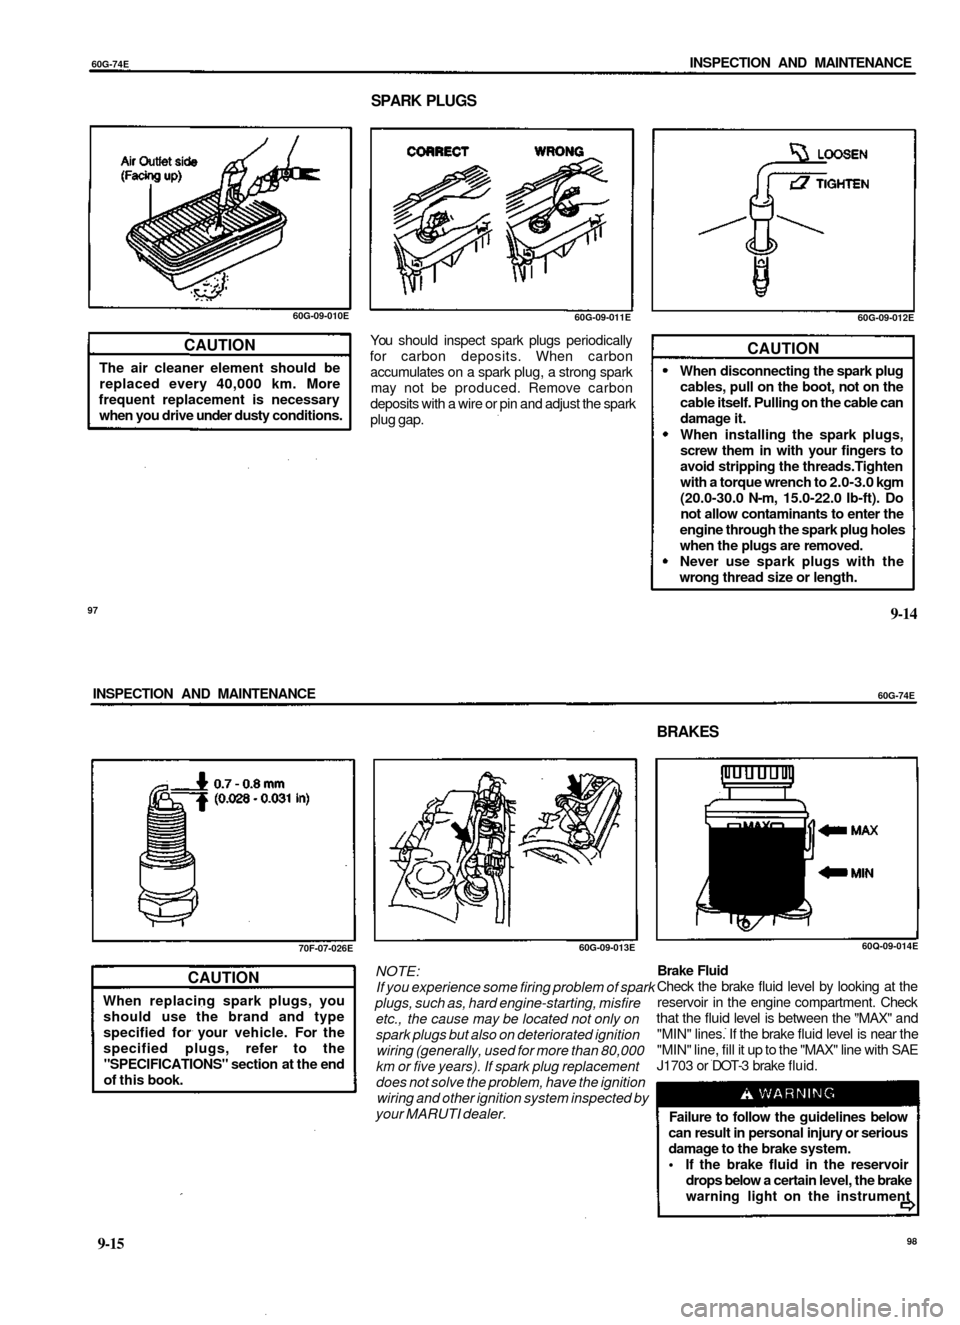 SUZUKI BALENO 1999 1.G Service Manual 
60G-74E 
INSPECTION AND MAINTENANCE

SPARK PLUGS

60G-09-010E

CAUTION

The air cleaner element should be

replaced every 40,000 km. More

frequent replacement is necessary

when you drive under dust